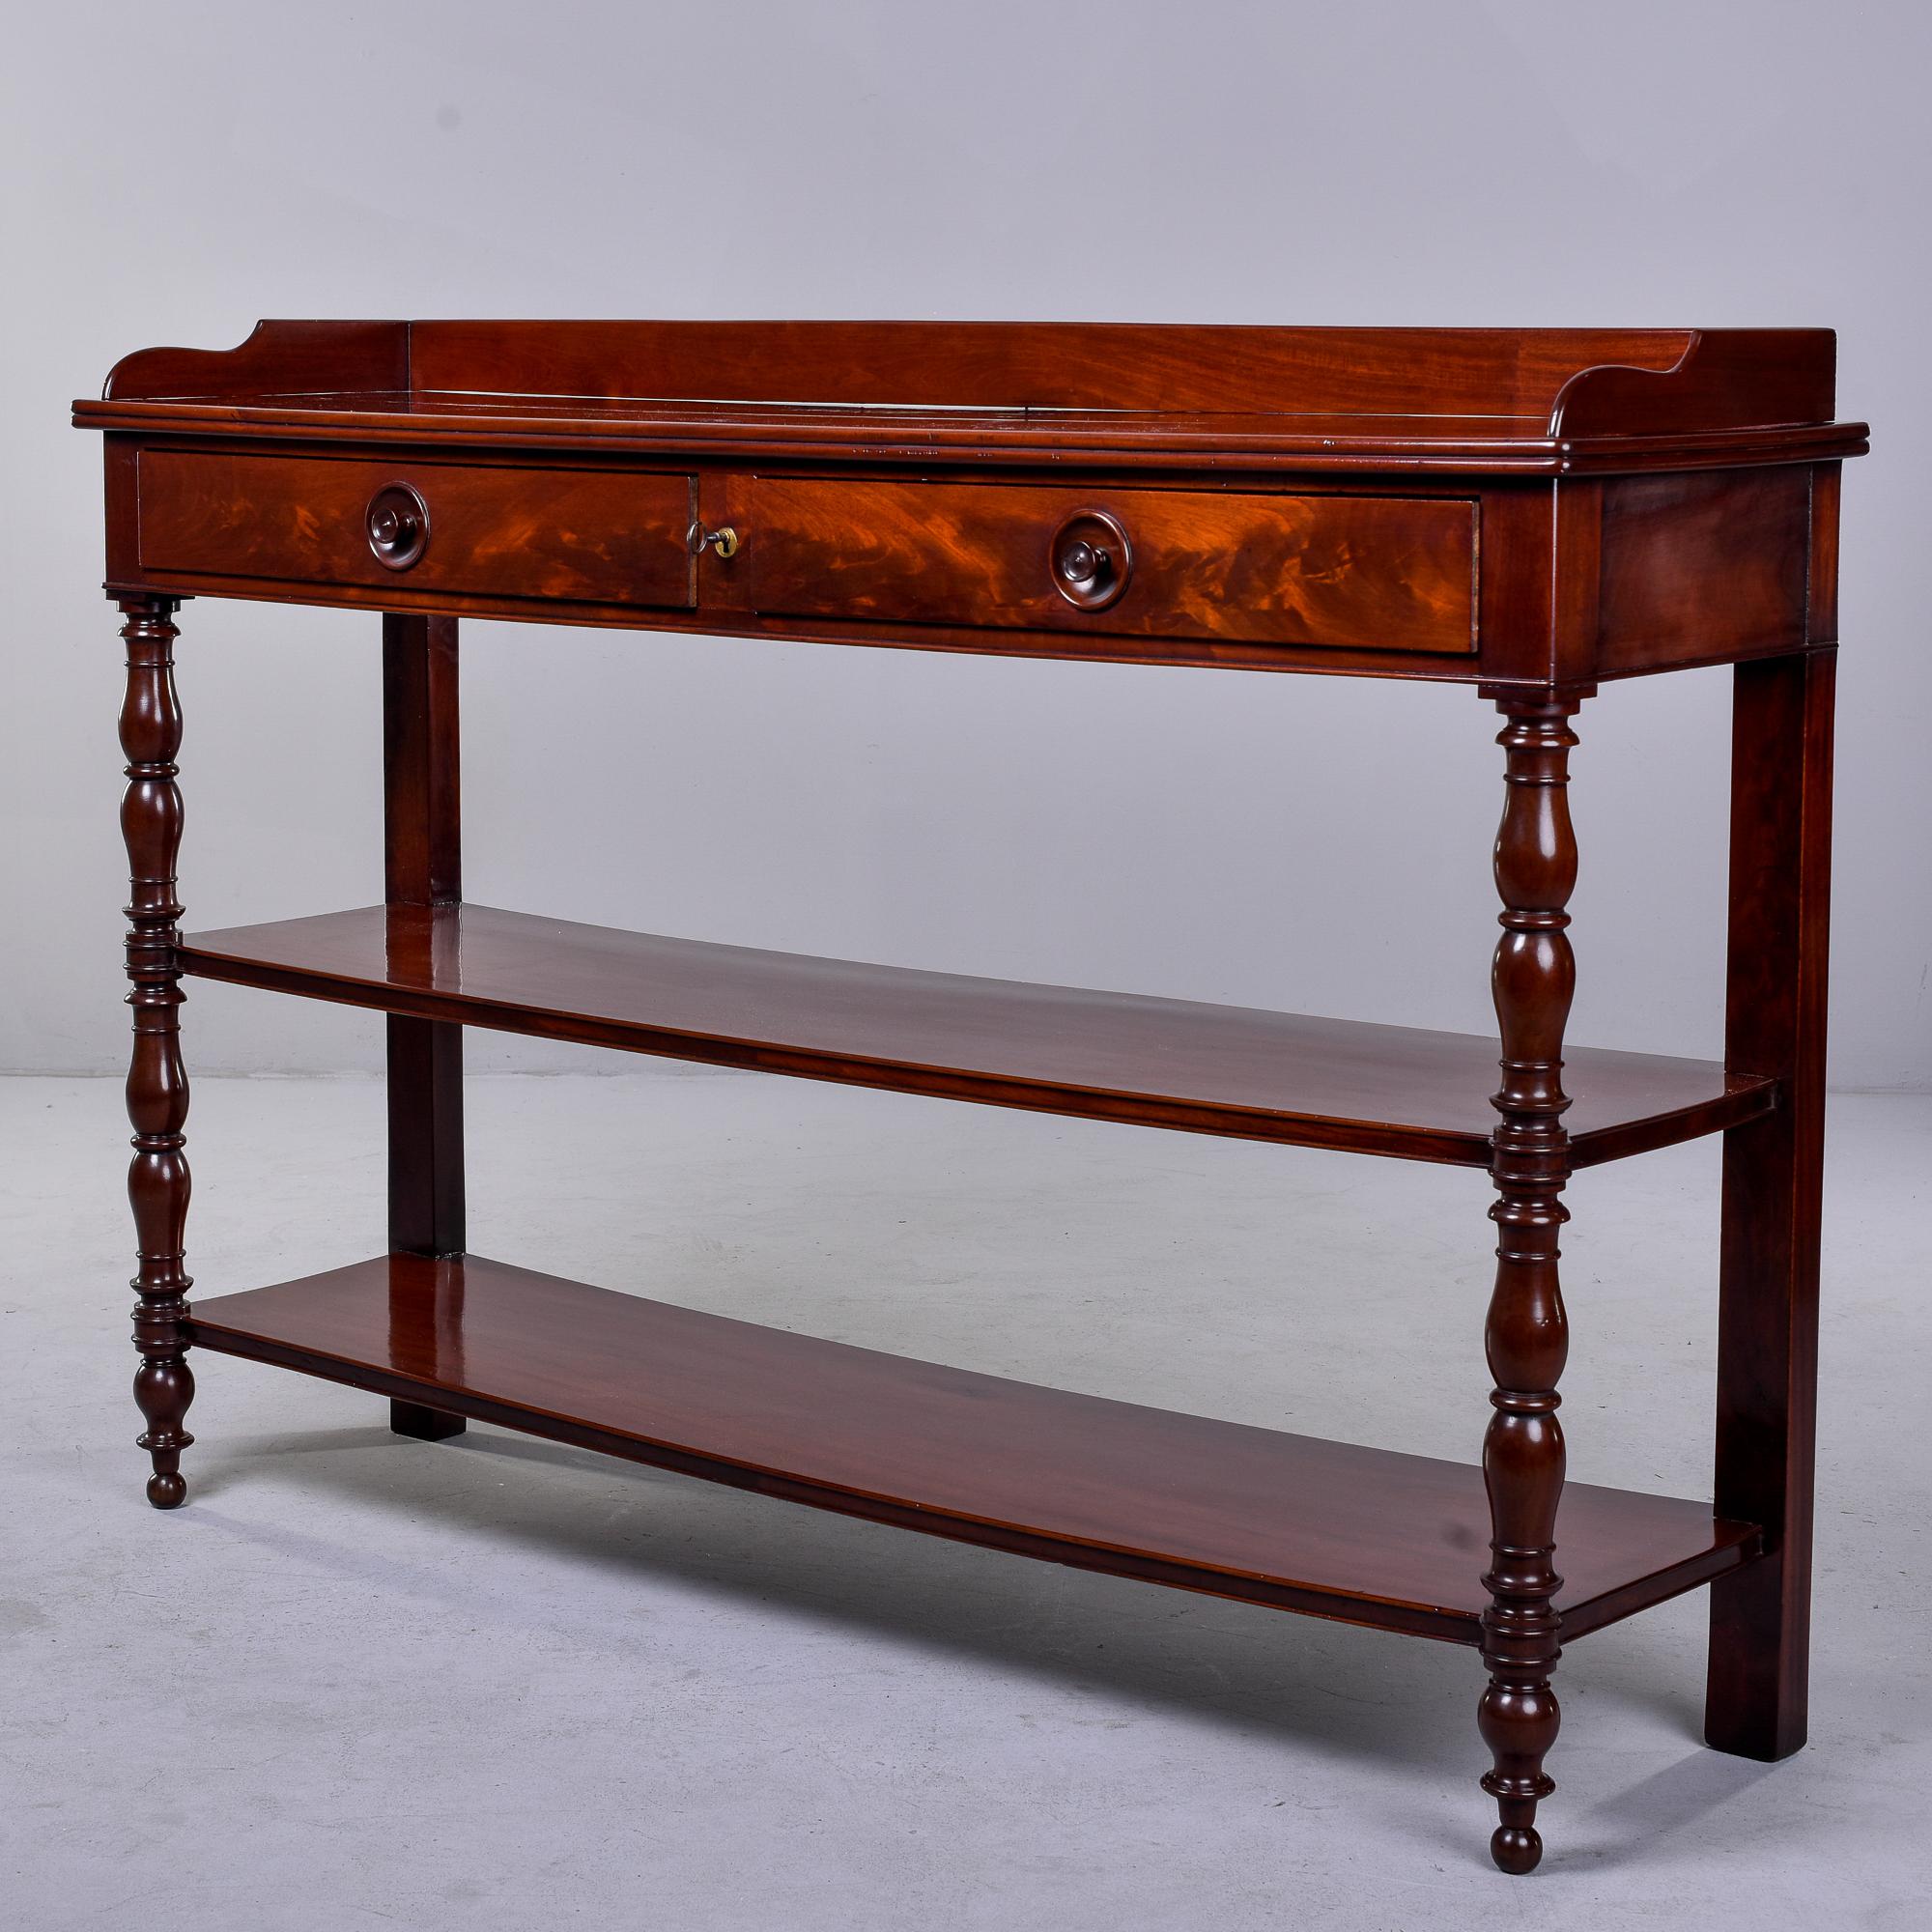 Early 20th C English Mahogany Three Tier Server with Drawers    For Sale 4